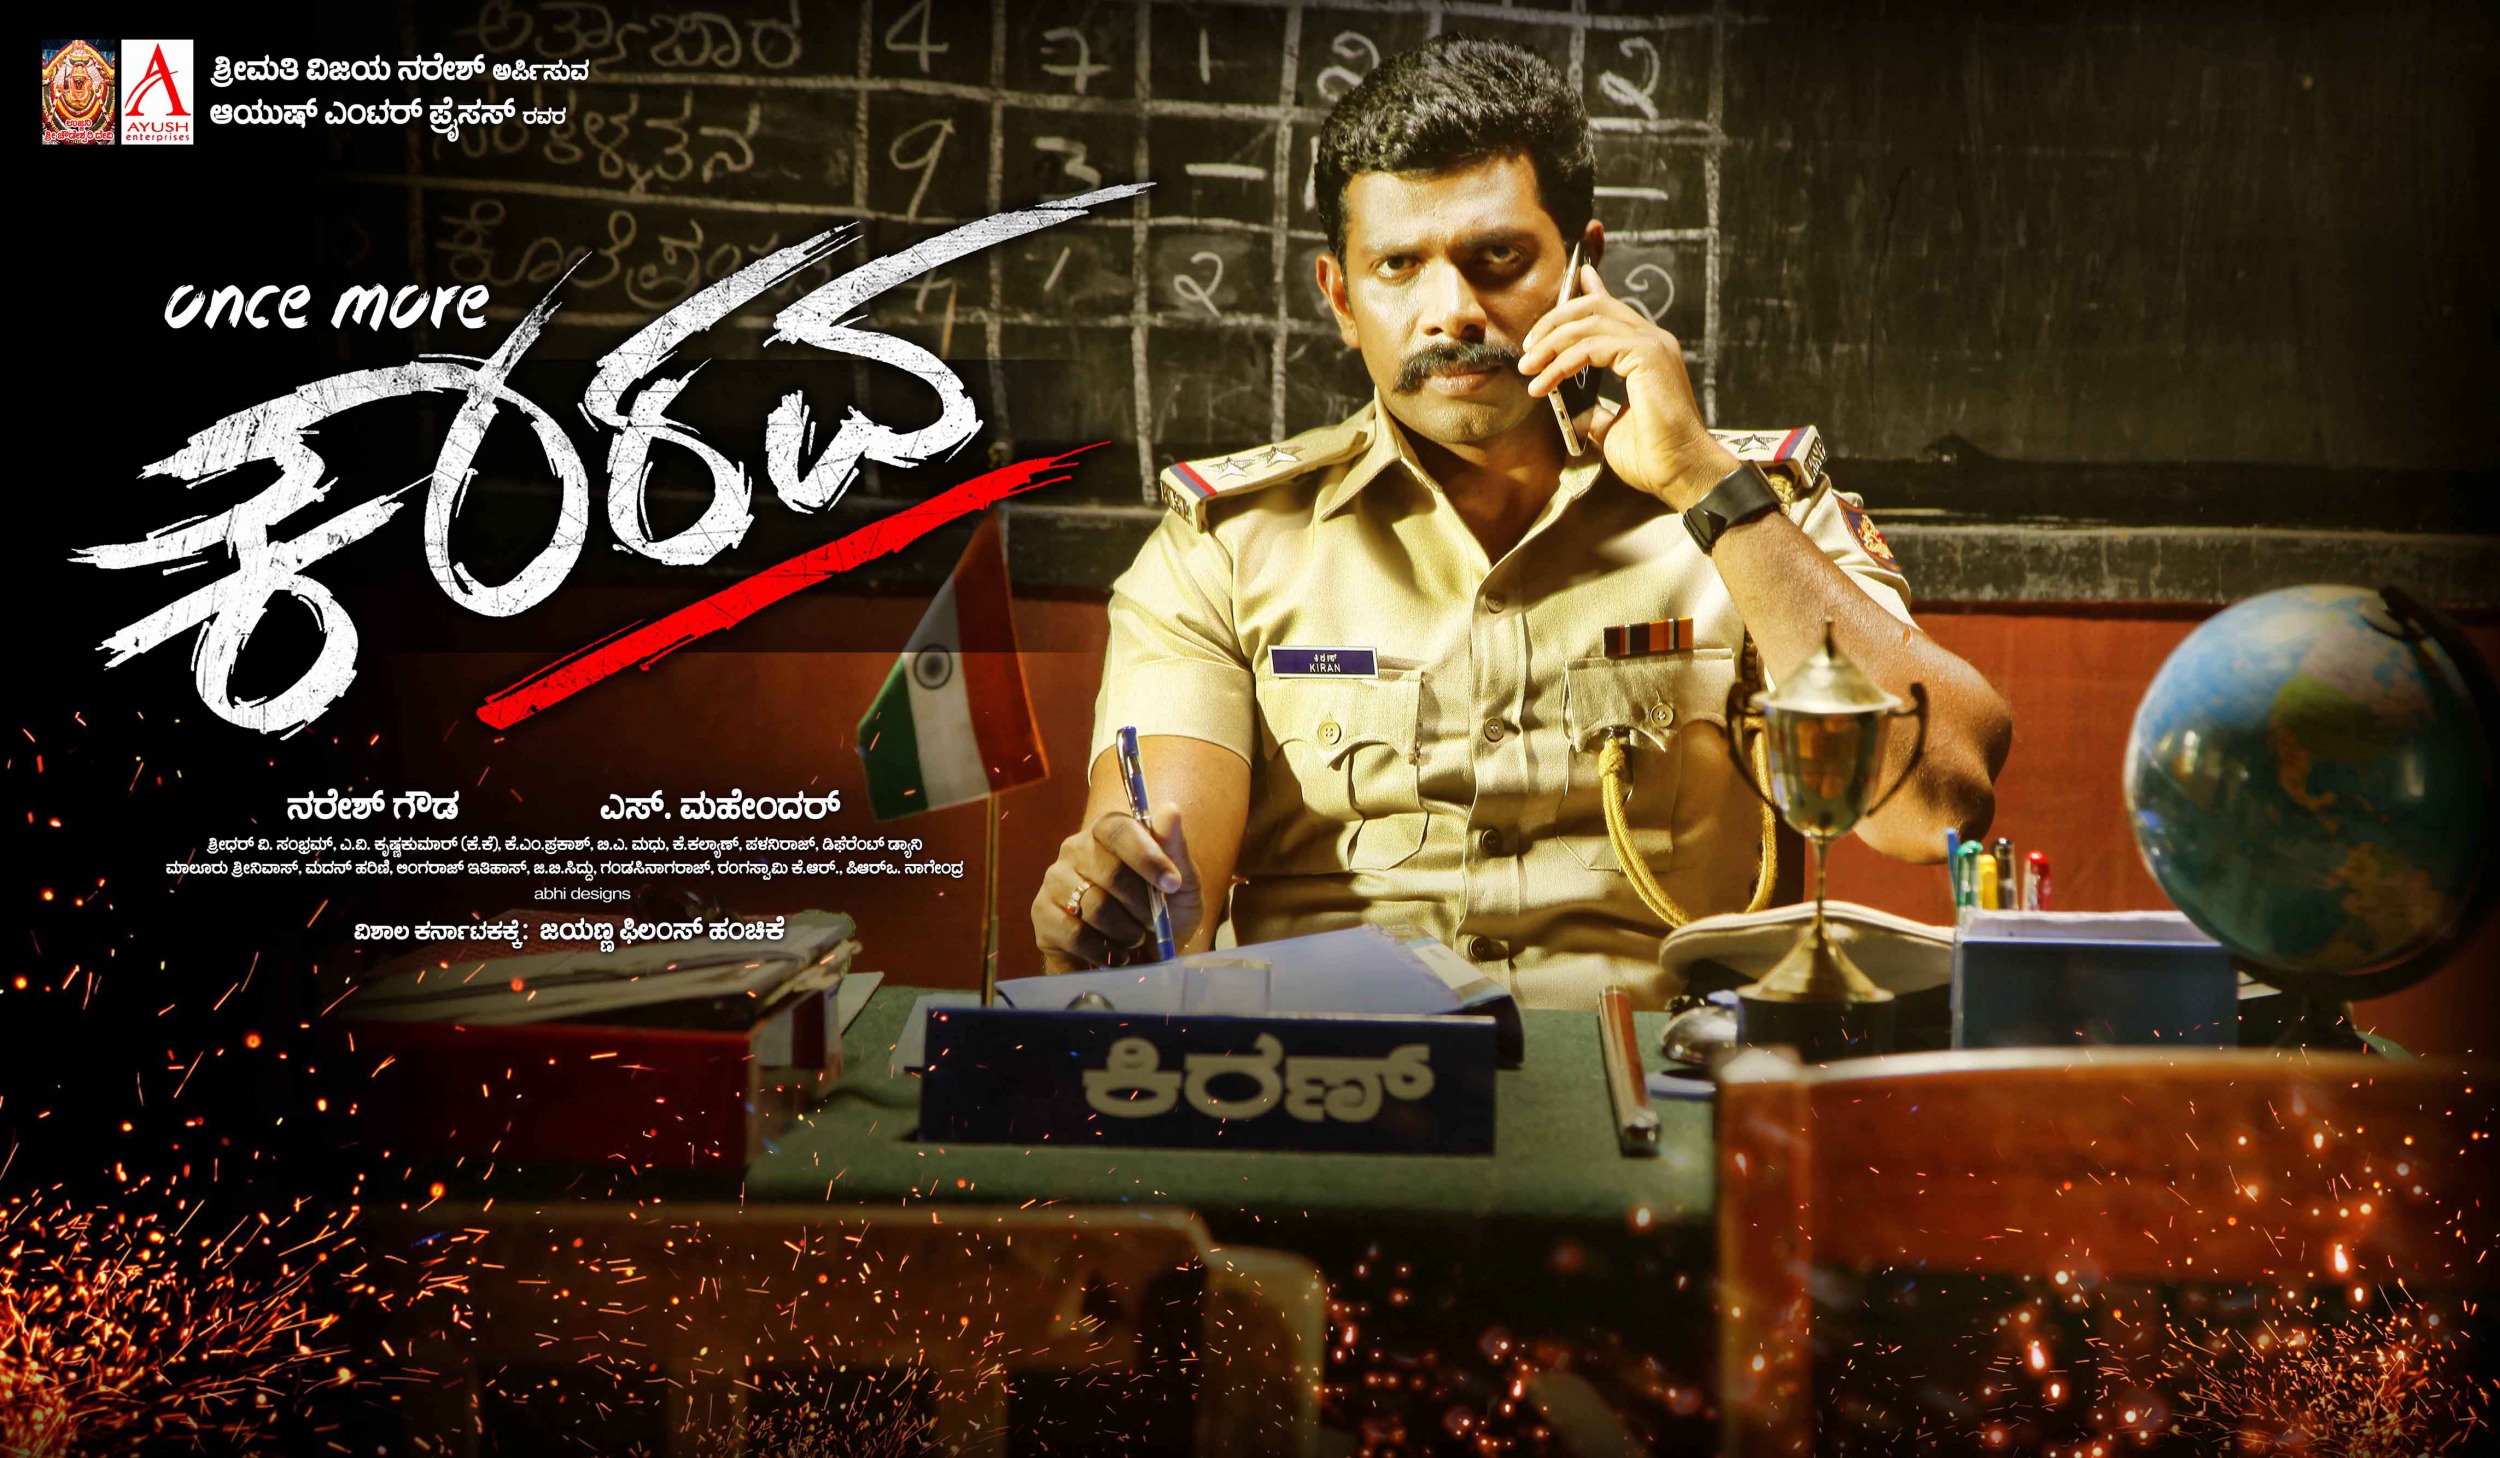 Mega Sized Movie Poster Image for Once More Kaurava (#15 of 20)